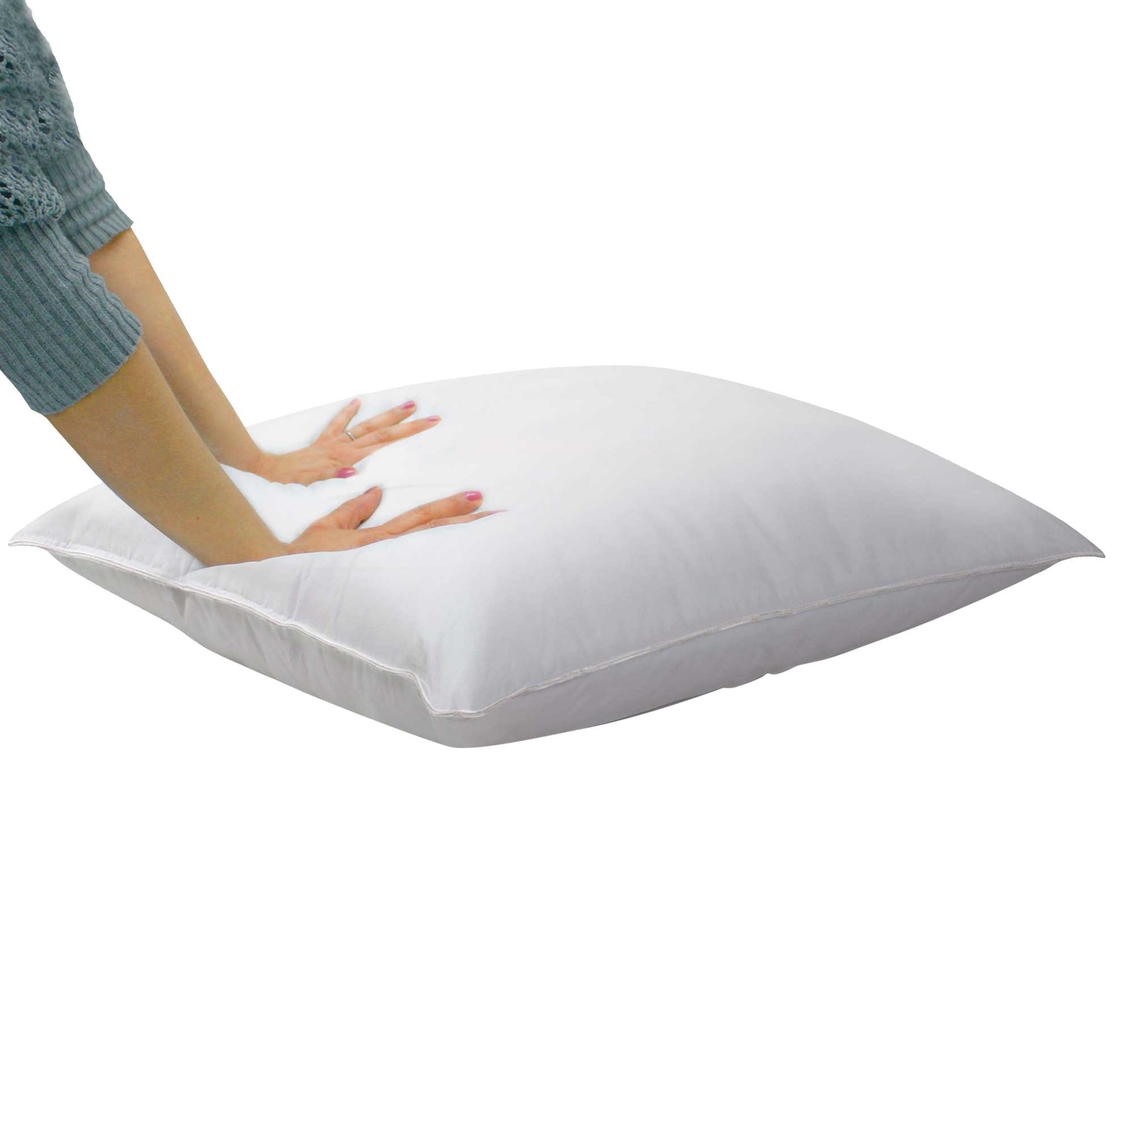 Rio Home Fashions PermaLoft Never Goes Flat Gel Pillow - Image 4 of 4